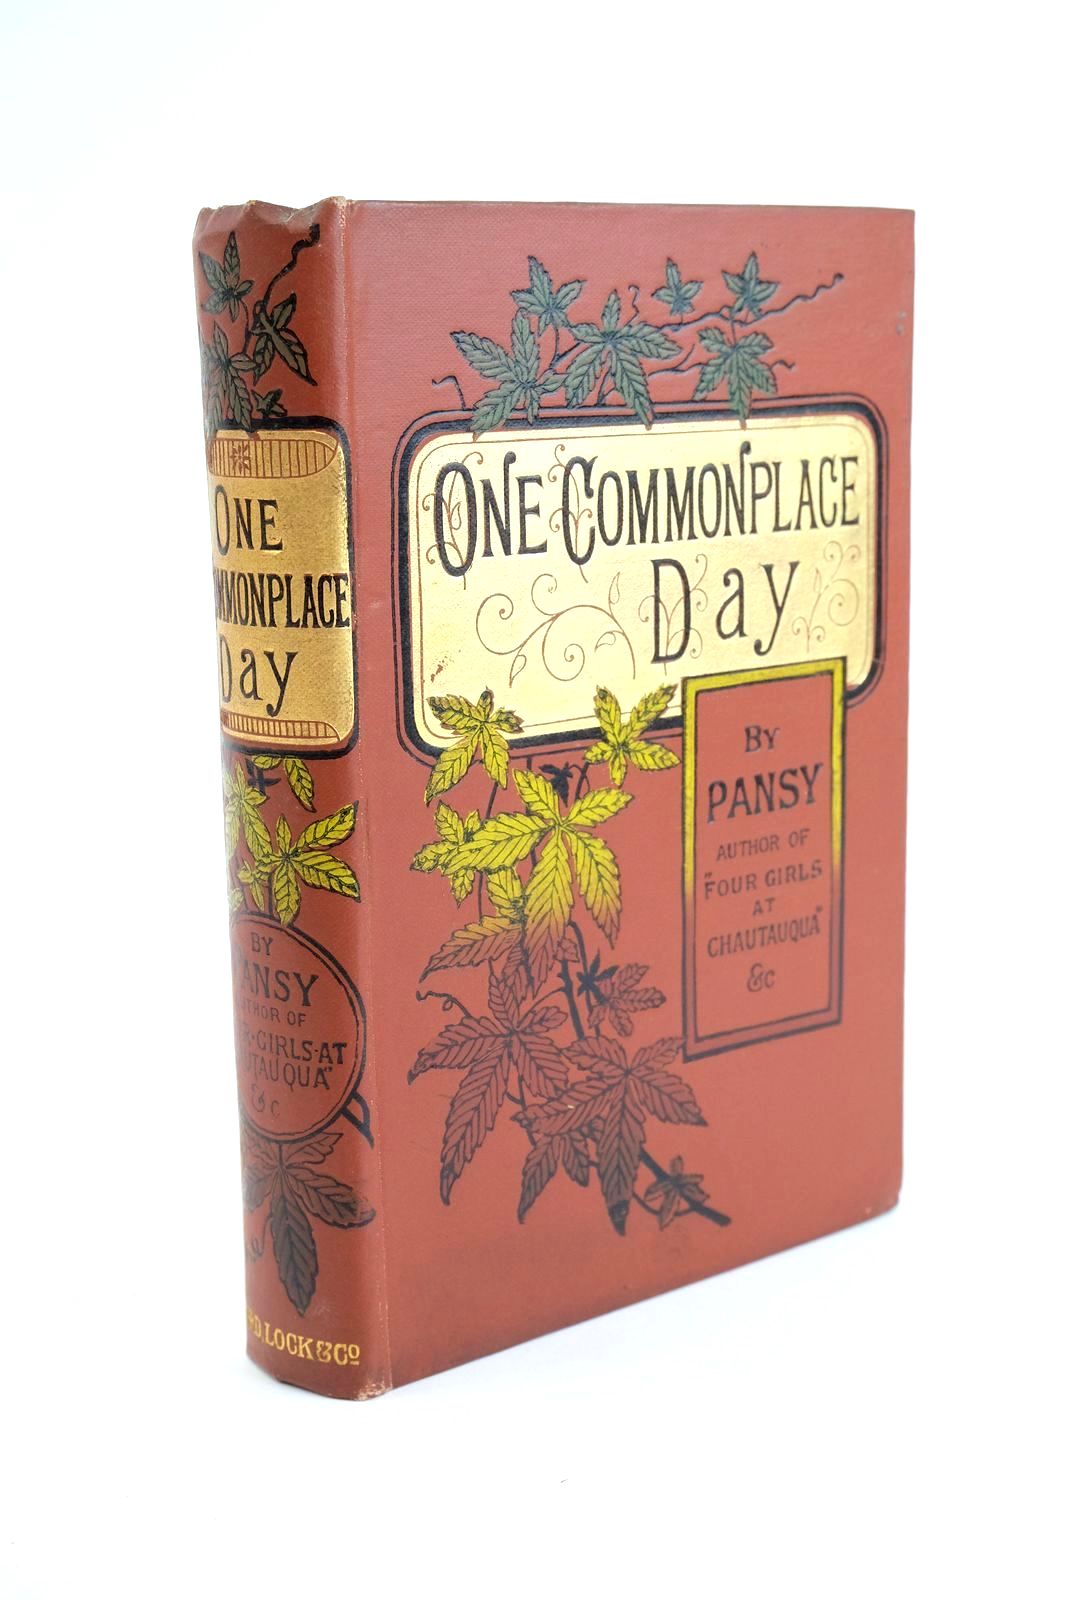 Photo of ONE COMMONPLACE DAY written by Pansy, published by Ward, Lock, Bowden & Co. (STOCK CODE: 1323788)  for sale by Stella & Rose's Books